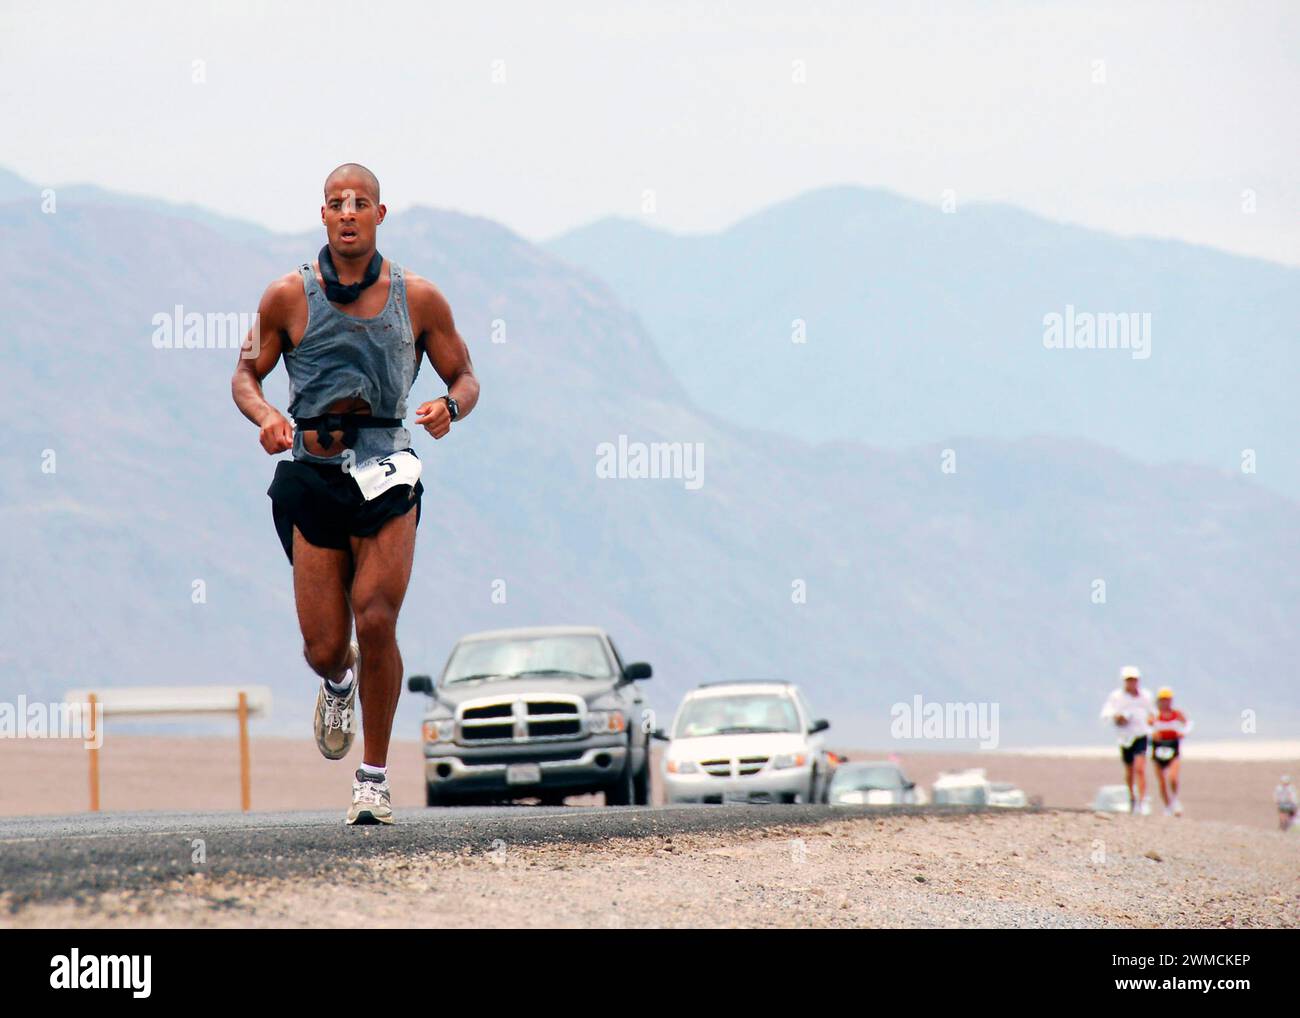 Death Valley, United States of America. 23 July, 2007. U.S Navy Special Warfare Operator 1st Class David Goggins, left, keeps up the pace as he runs 135 miles through scorching Death Valley National Park during the Badwater Ultramarathon, July 23, 2007 in Death Valley, California. Goggins finished the race in third place after 25 hours of running from the lowest point in the USA to the highest point. Credit: MCS Brandon Rogers/US Navy Photo/Alamy Live News Stock Photo